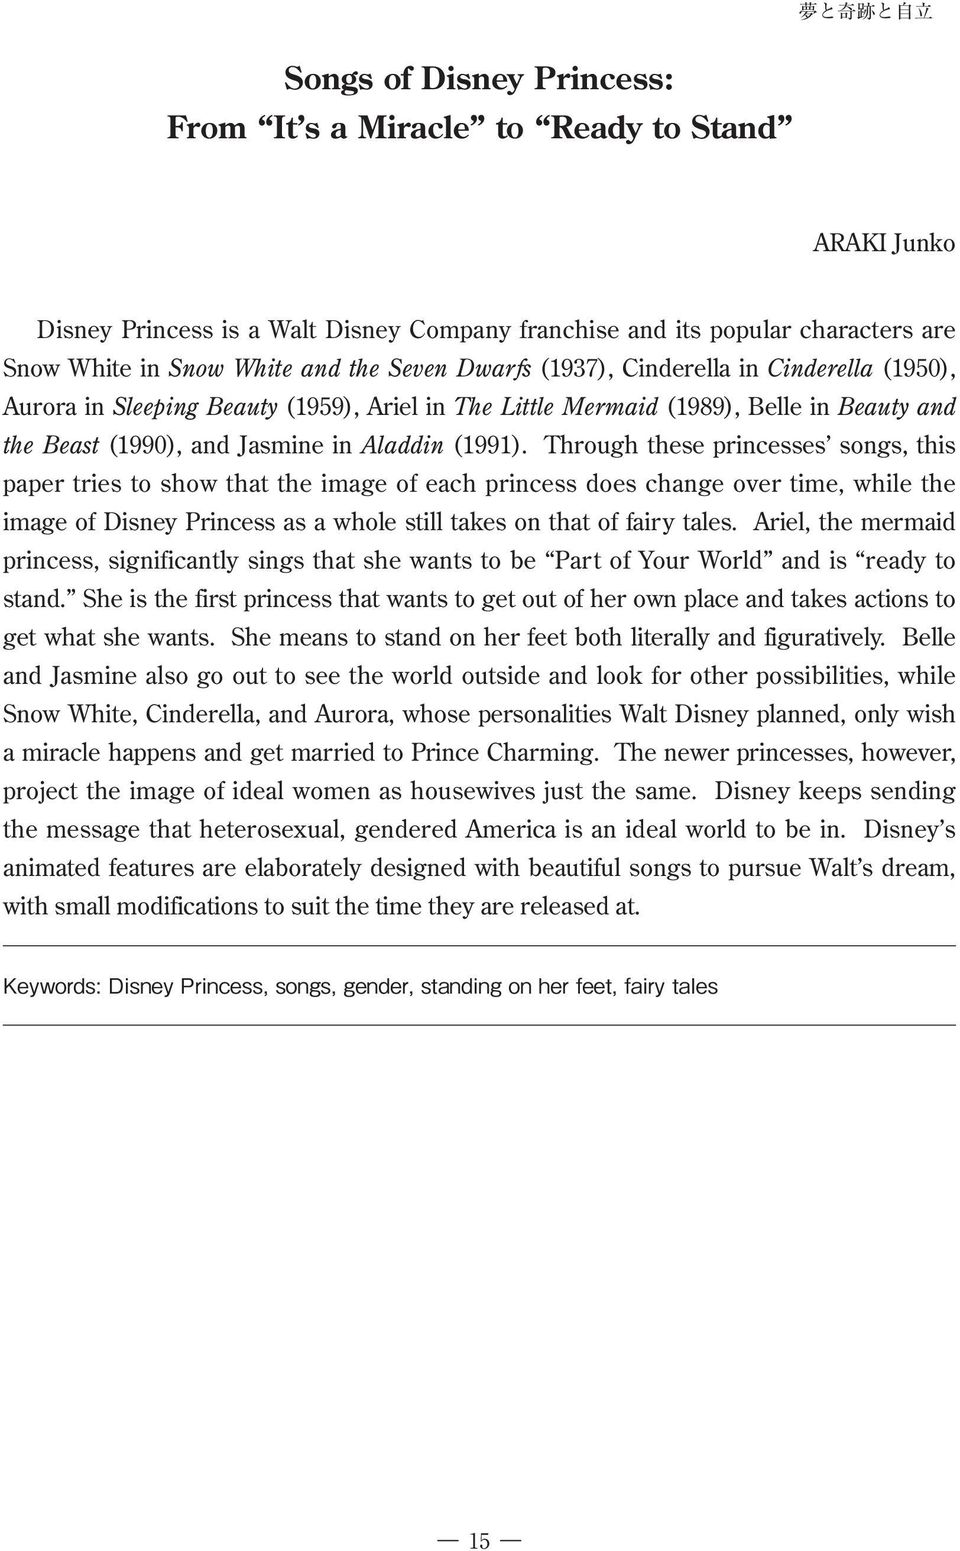 Through these princesses songs, this paper tries to show that the image of each princess does change over time, while the image of Disney Princess as a whole still takes on that of fairy tales.